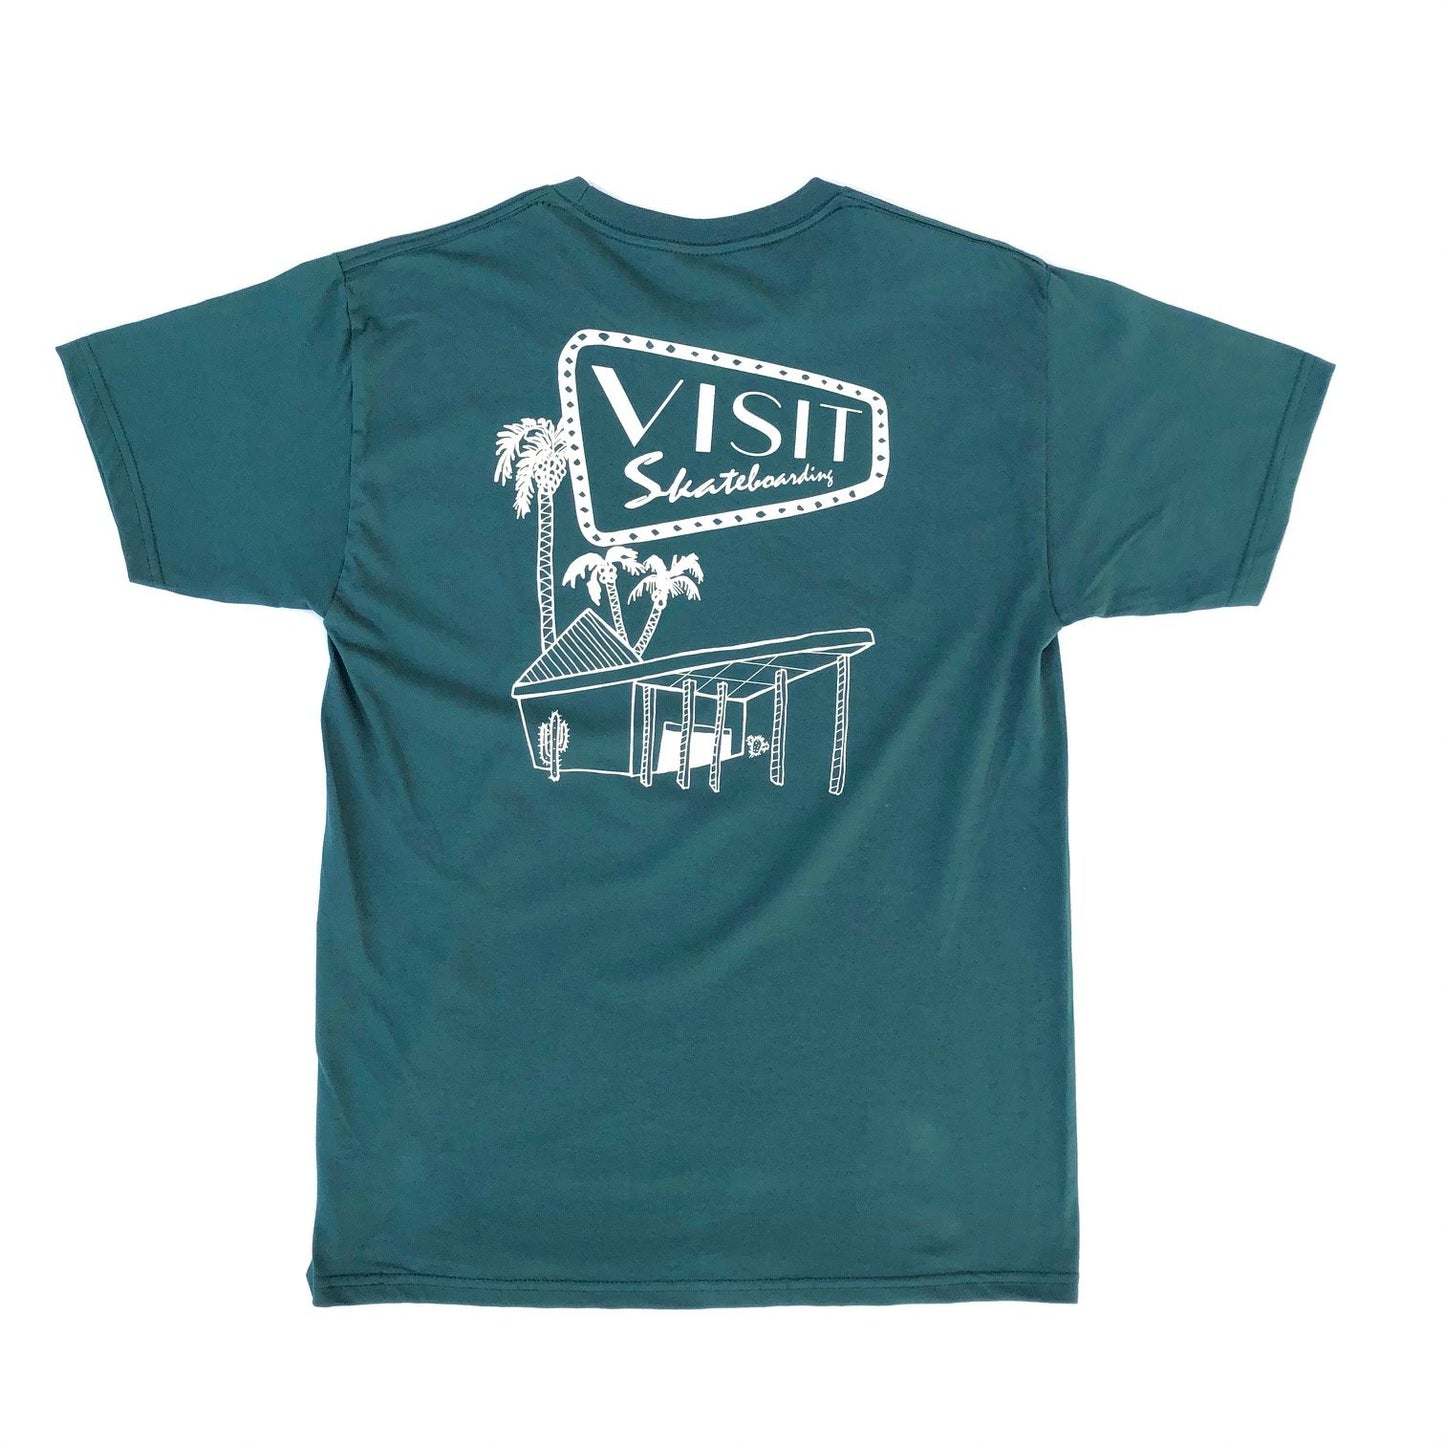 Motel Visit S/S Tee Shirt Pine (size options listed)